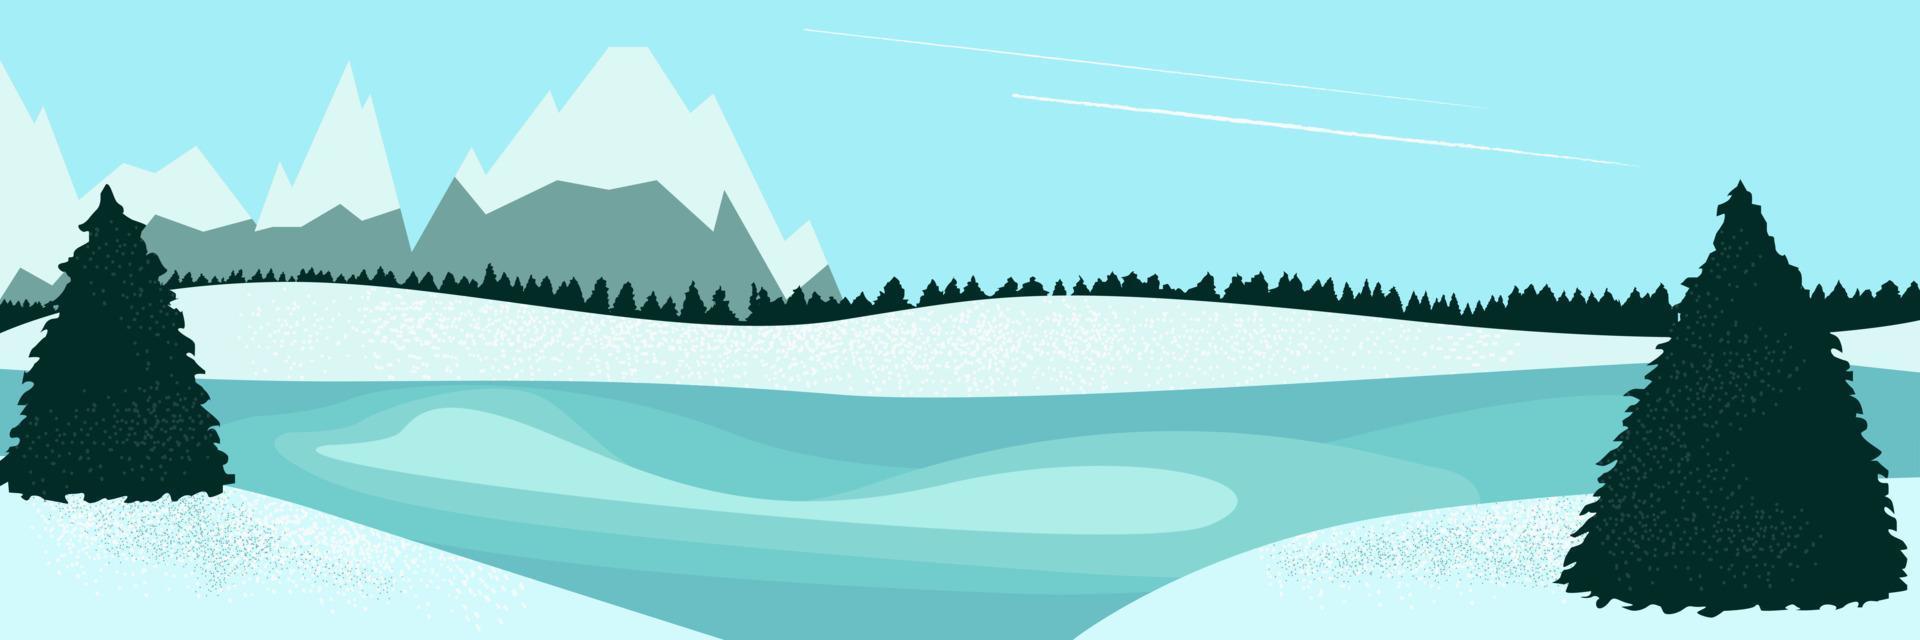 landscape winter lake and fir trees vector